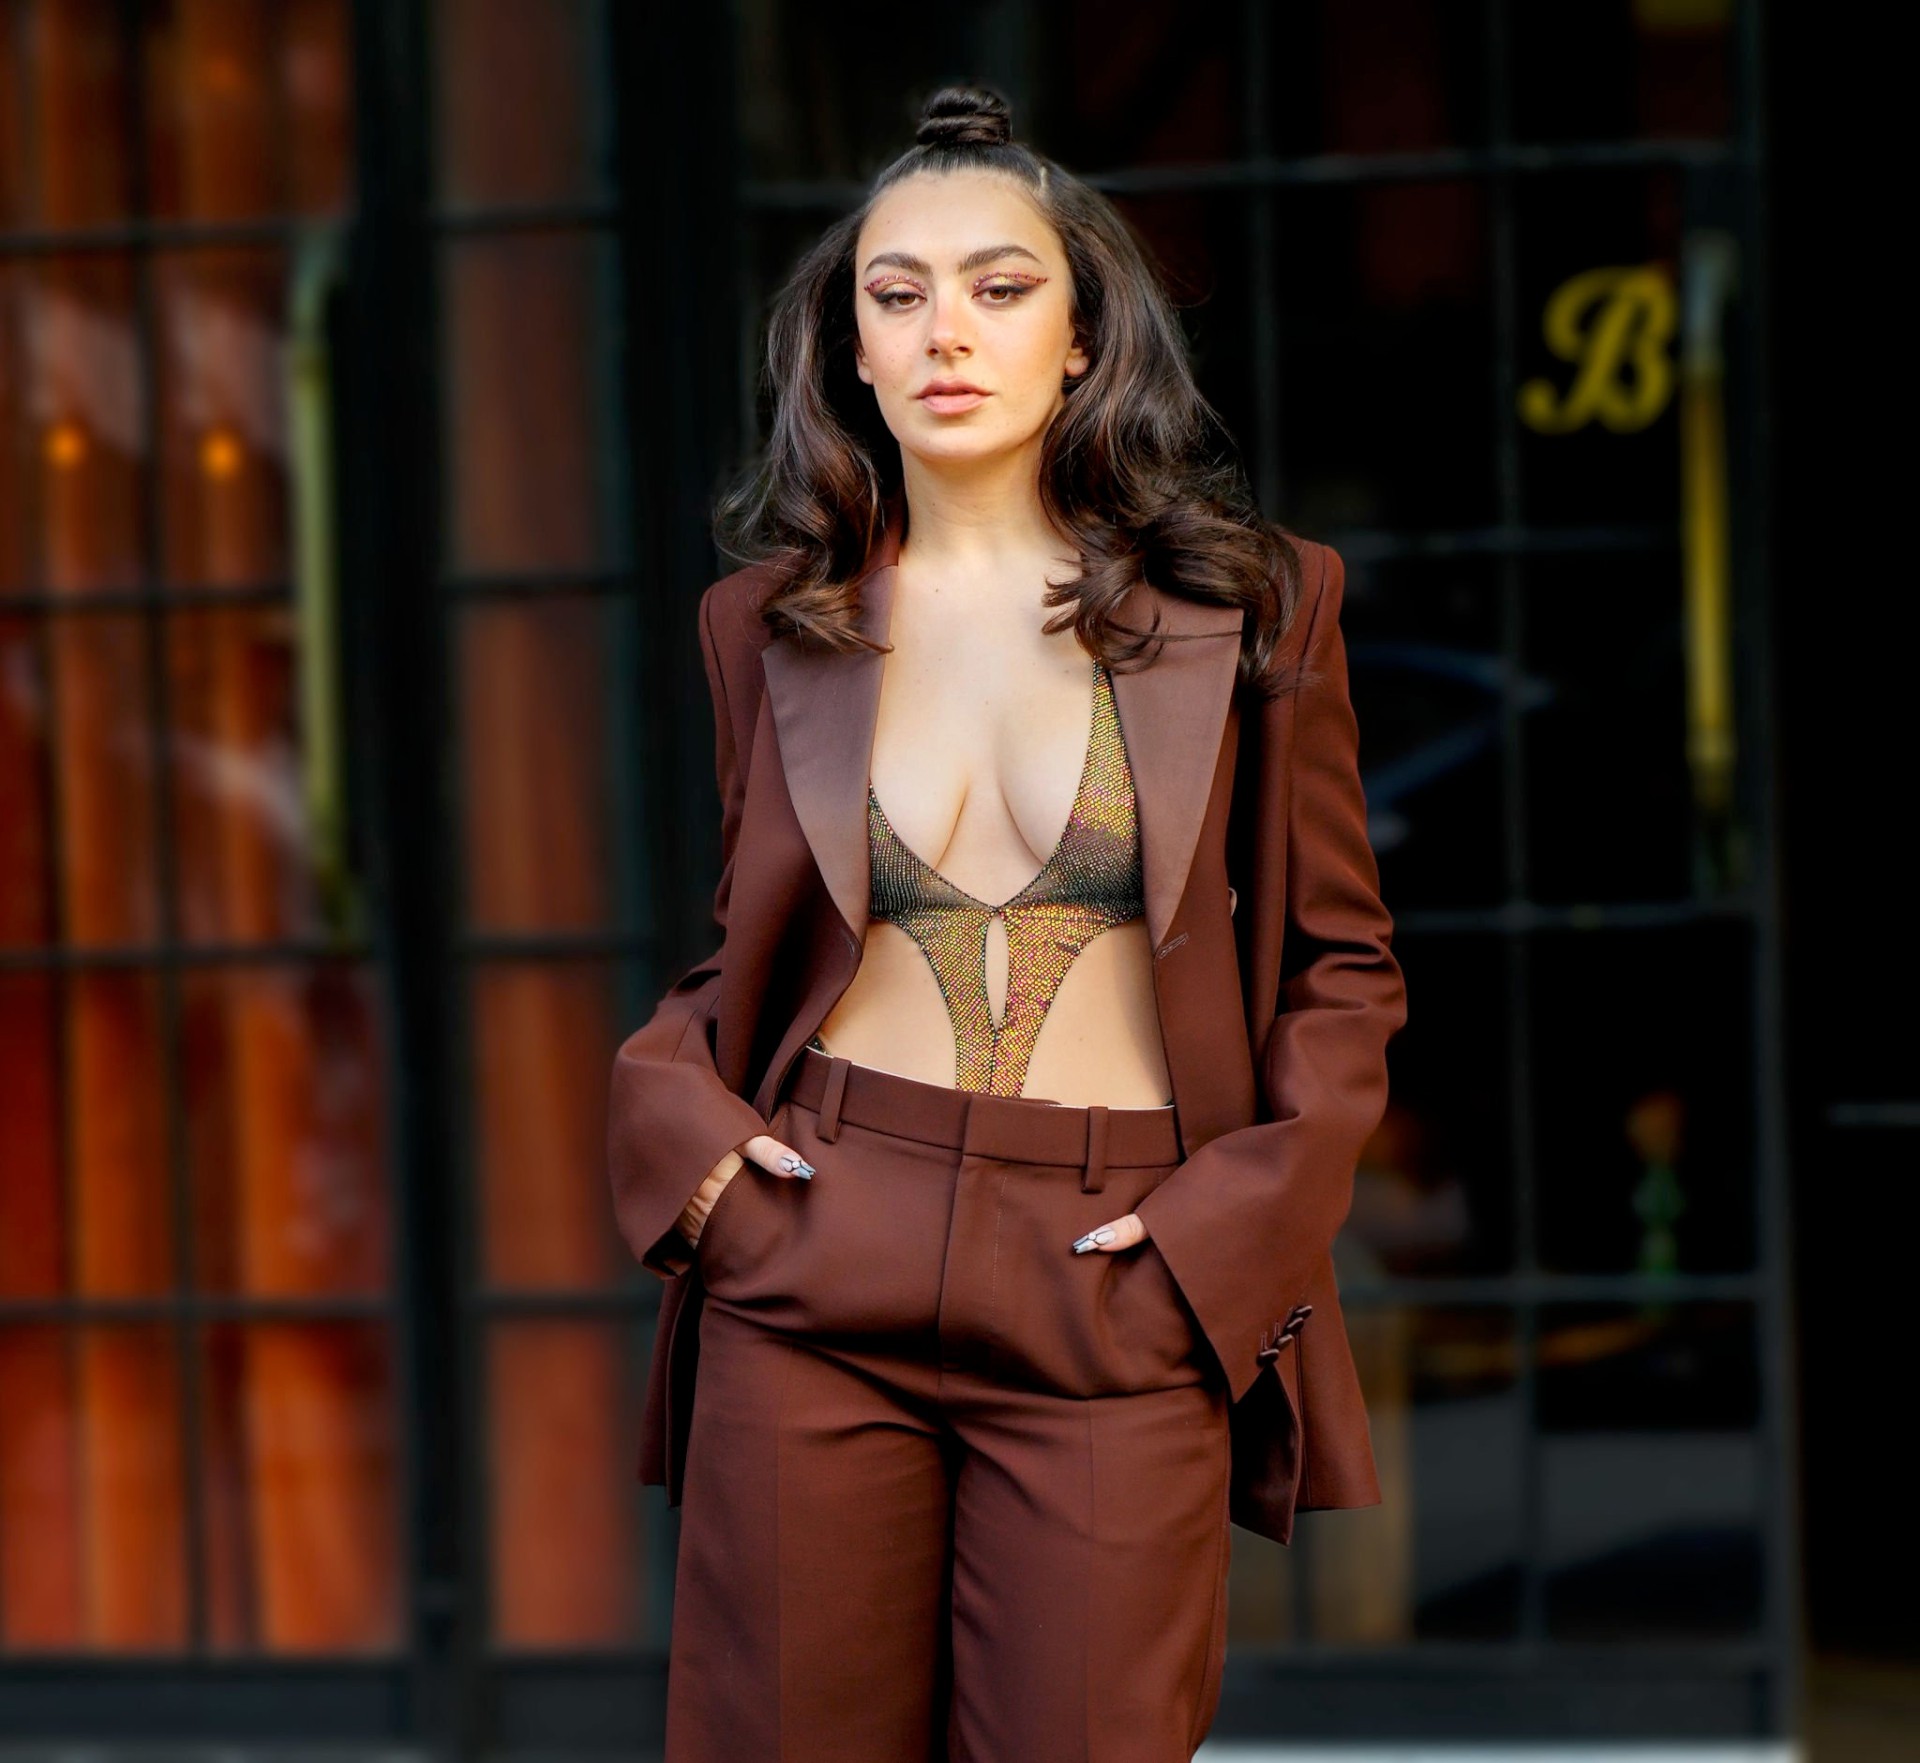 Charli XCX - Sexy Boobs at The Bowery Hotel in New York. 